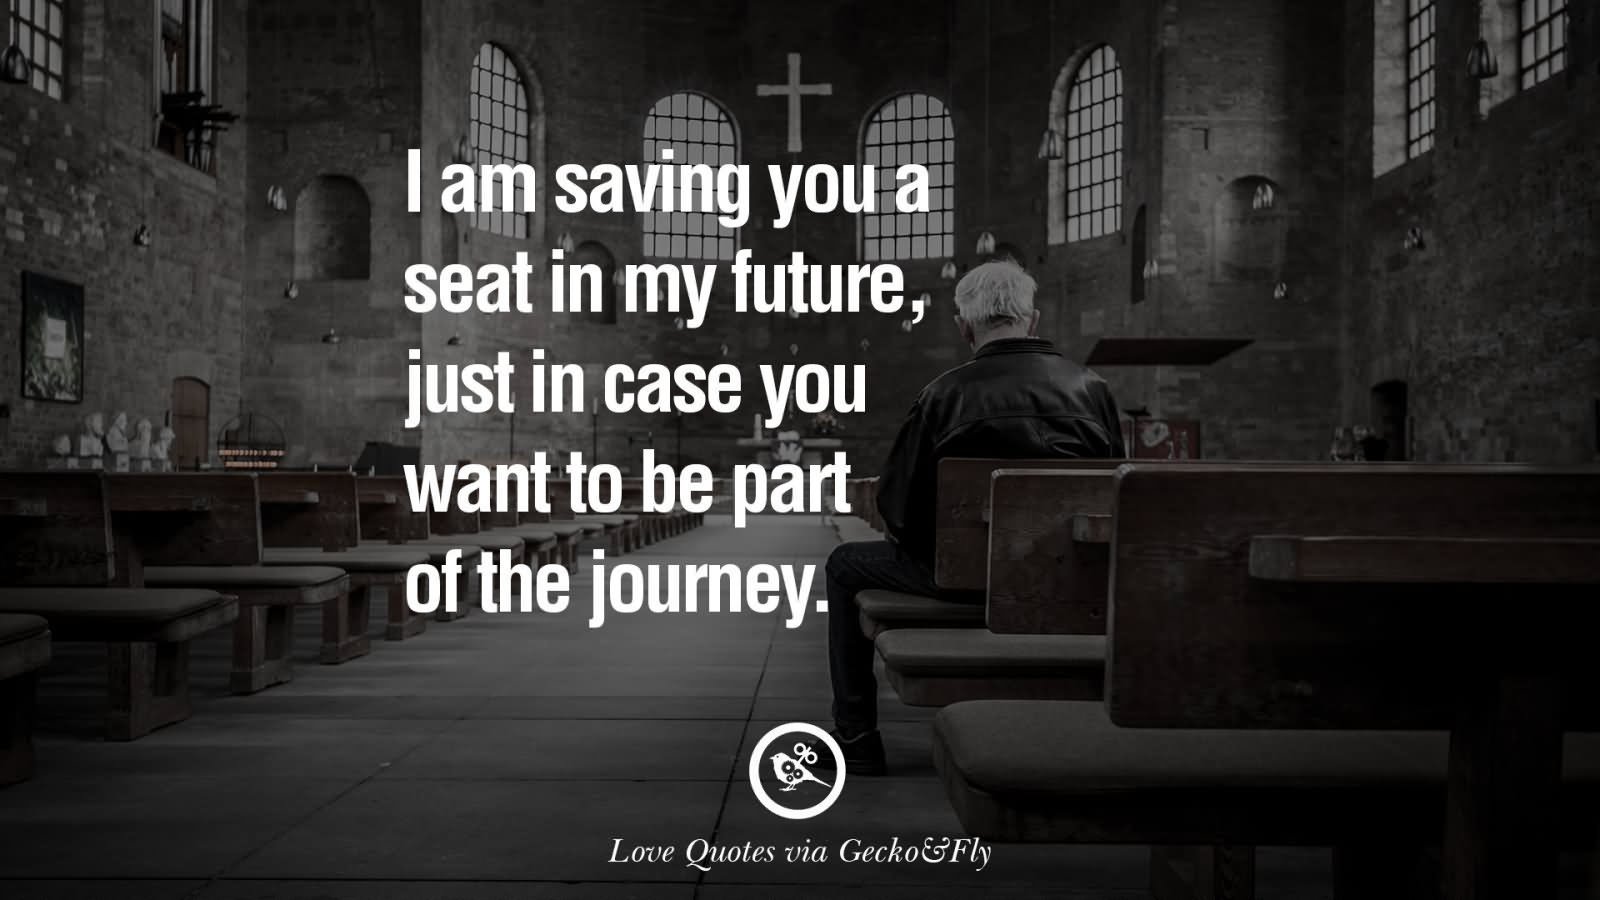 I am saving you a seat in my future,just in case you want to be part of the journey